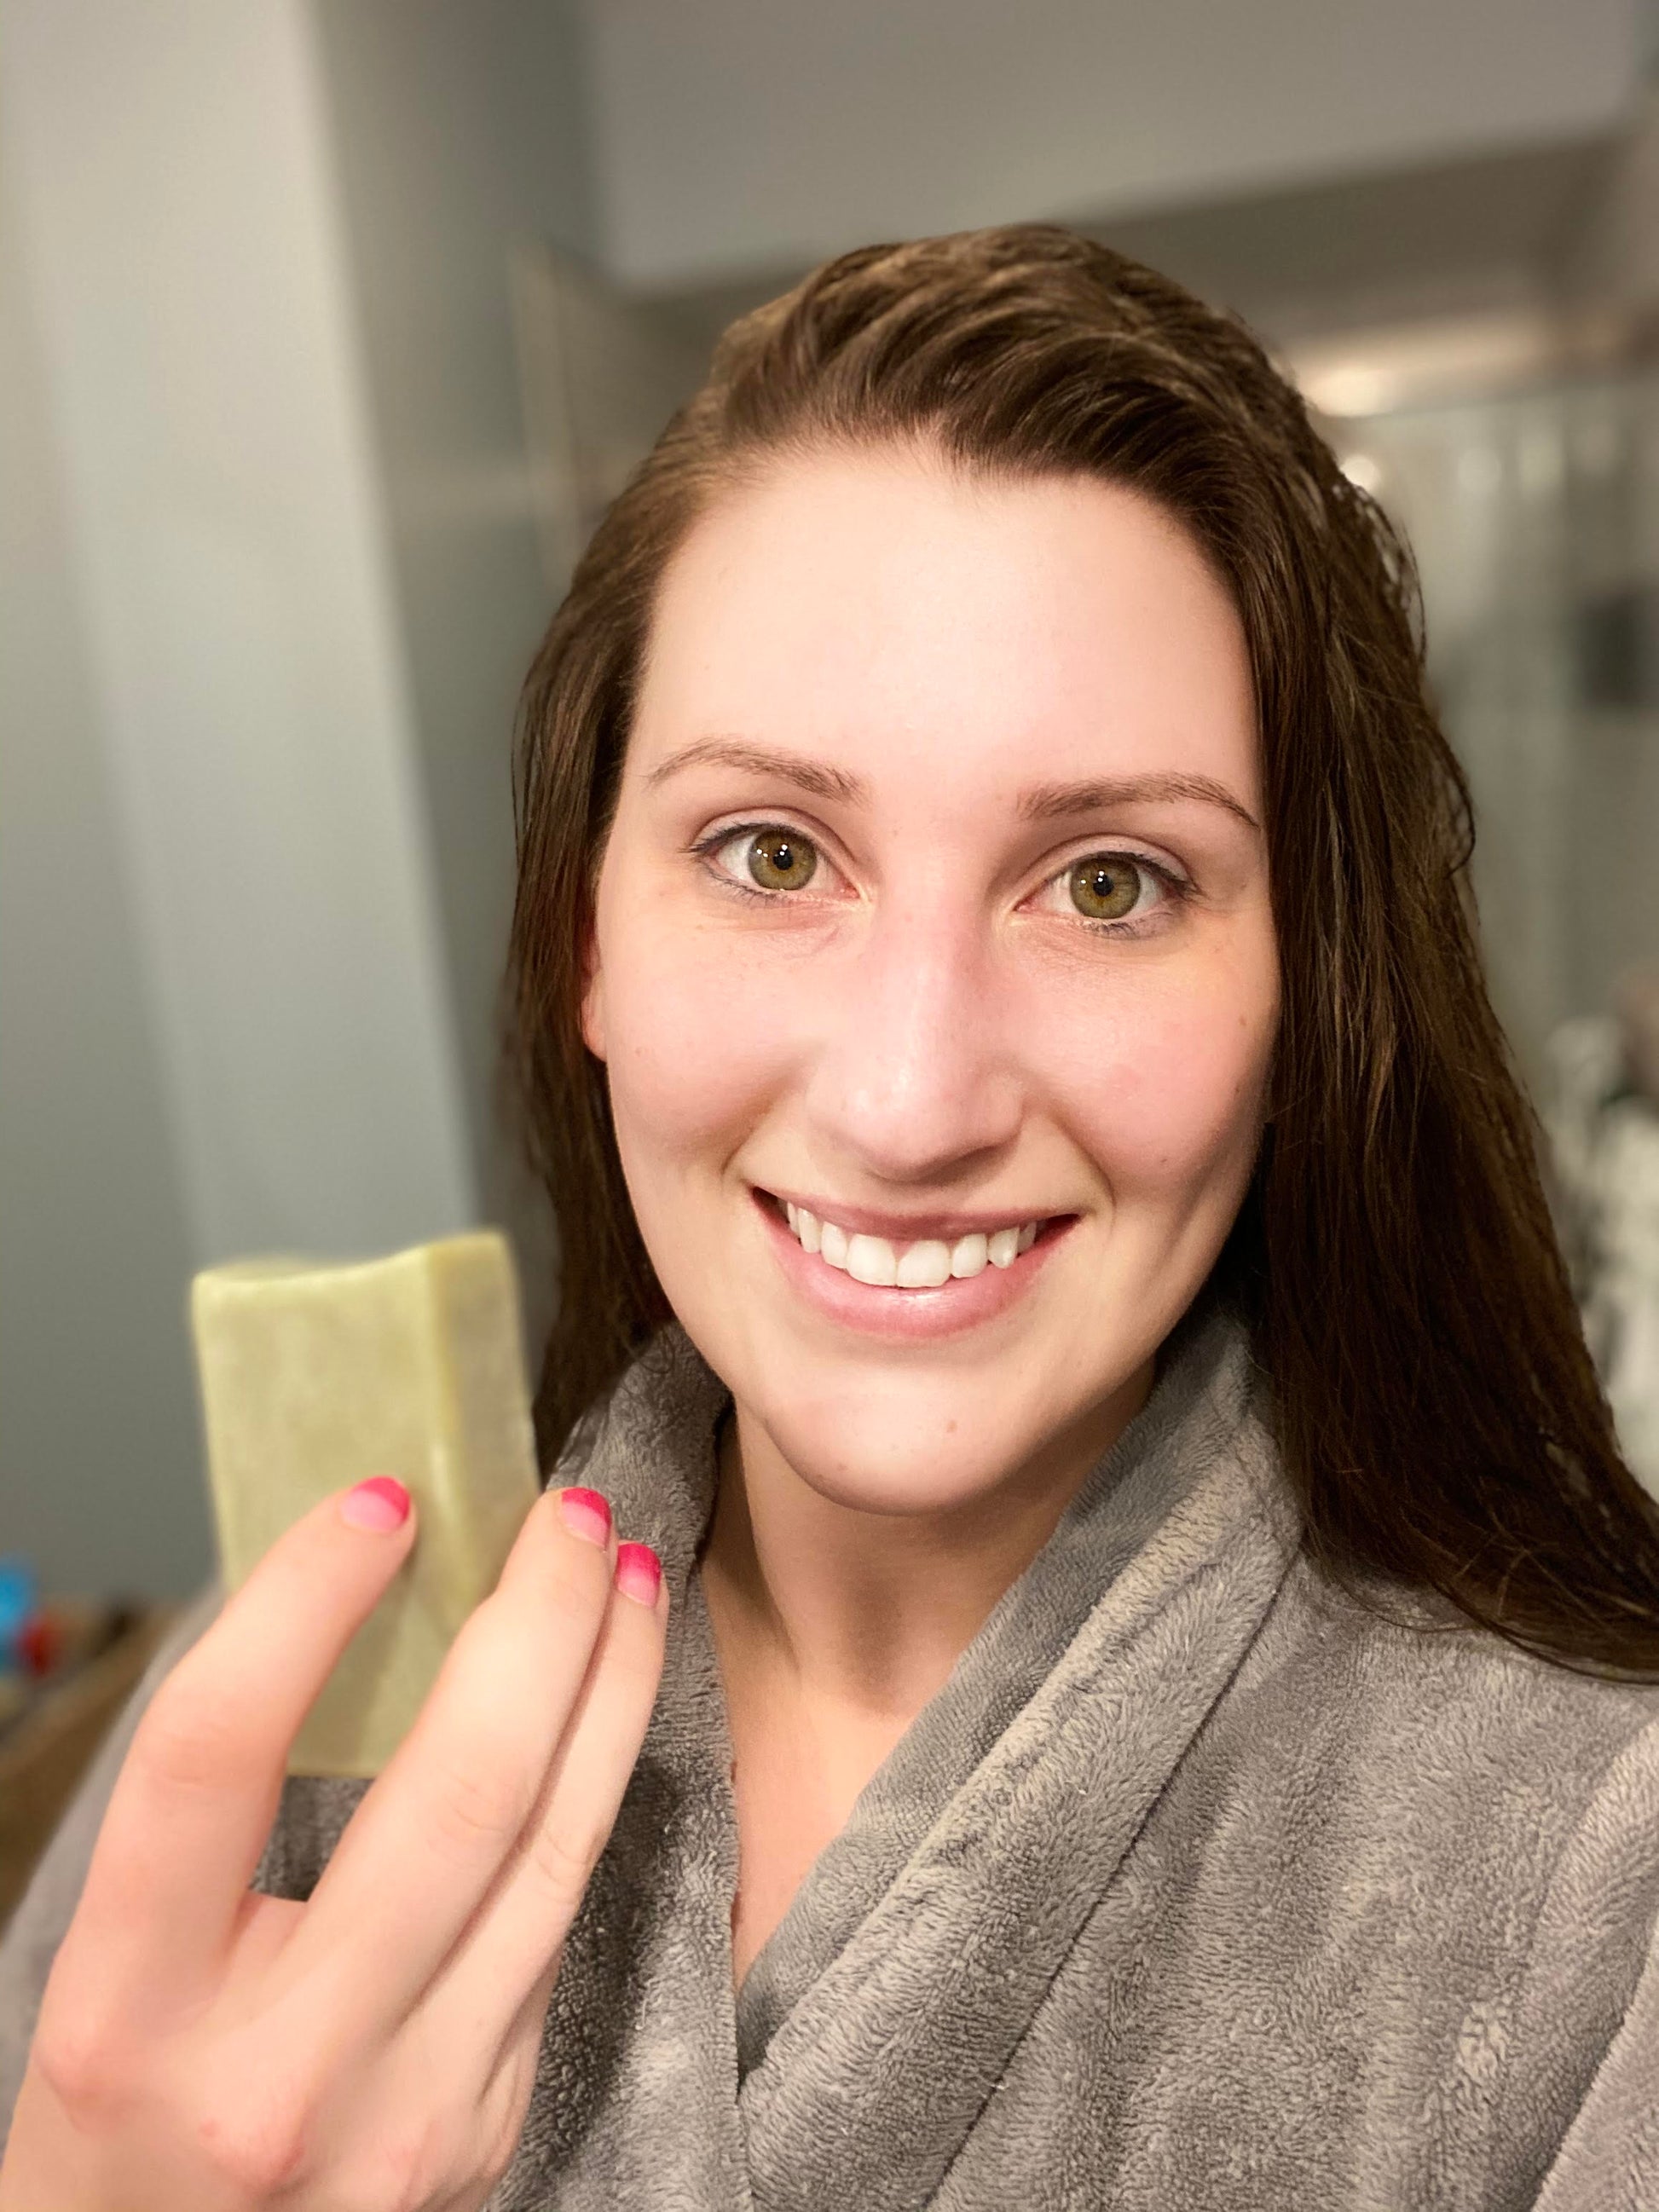 Avocado facial soap bars are made with pure avocado puree and leaves the face feeling clean and smooth